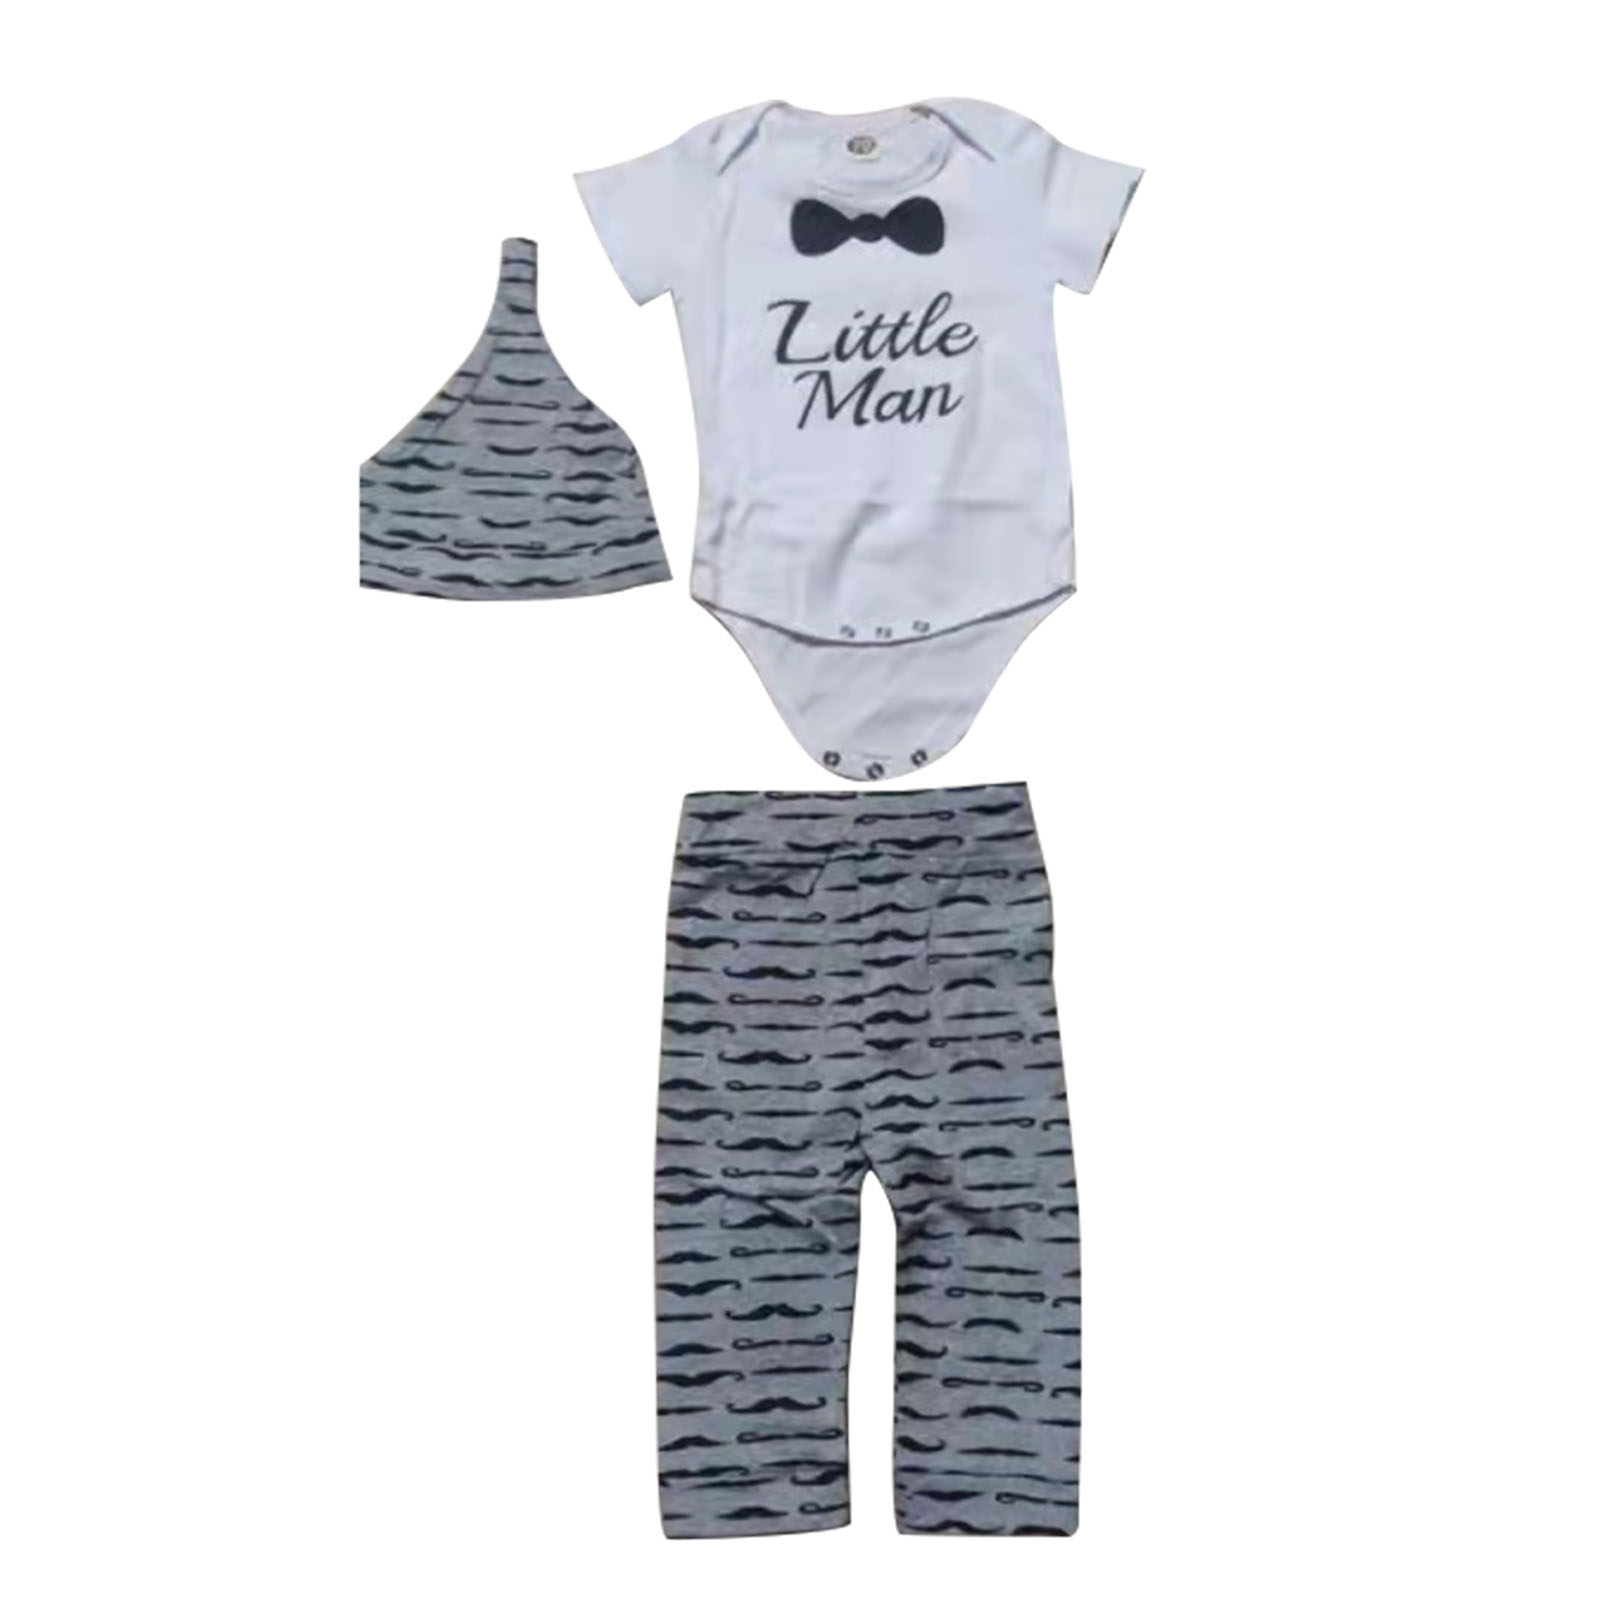 Newborn Baby Boy Infant Short Sleeve Romper + Long Pants +Hat Outfit Set Clothes - image 1 of 6